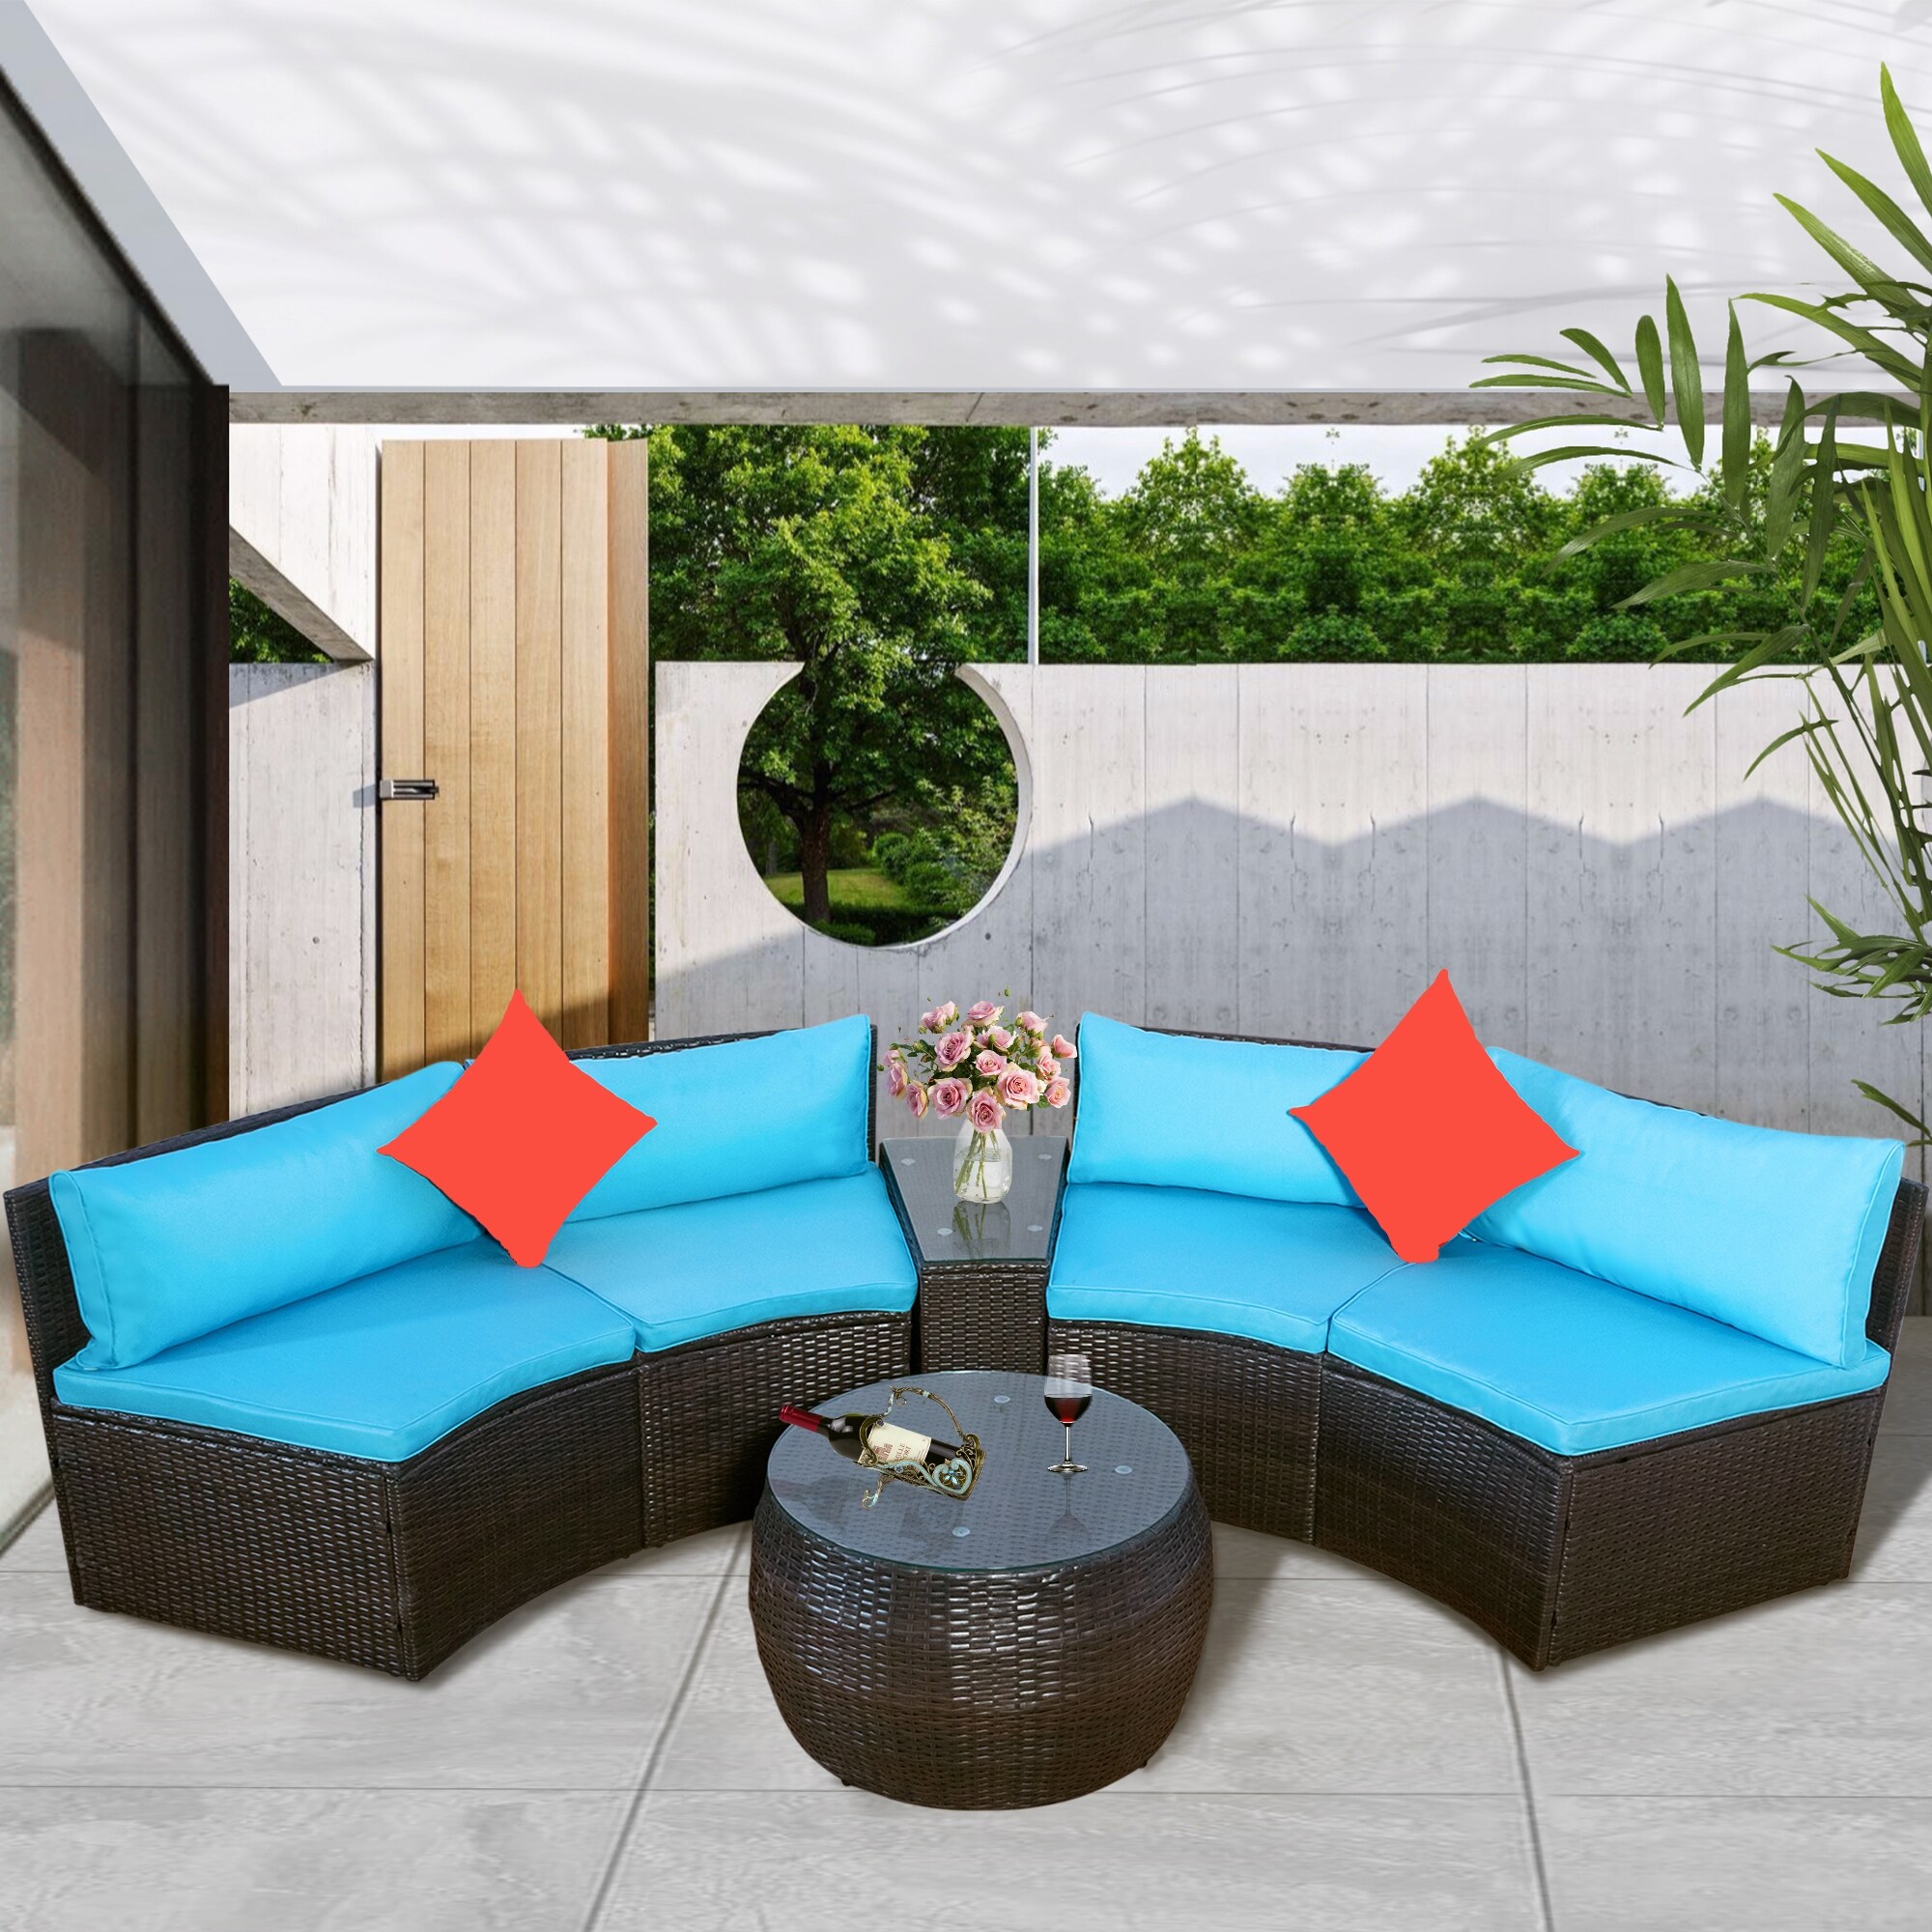 4-piece Patio Furniture Sets Outdoor Half-moon Sectional Furniture Wicker 2 People Sofa Set With Two Pillows And Coffee Table